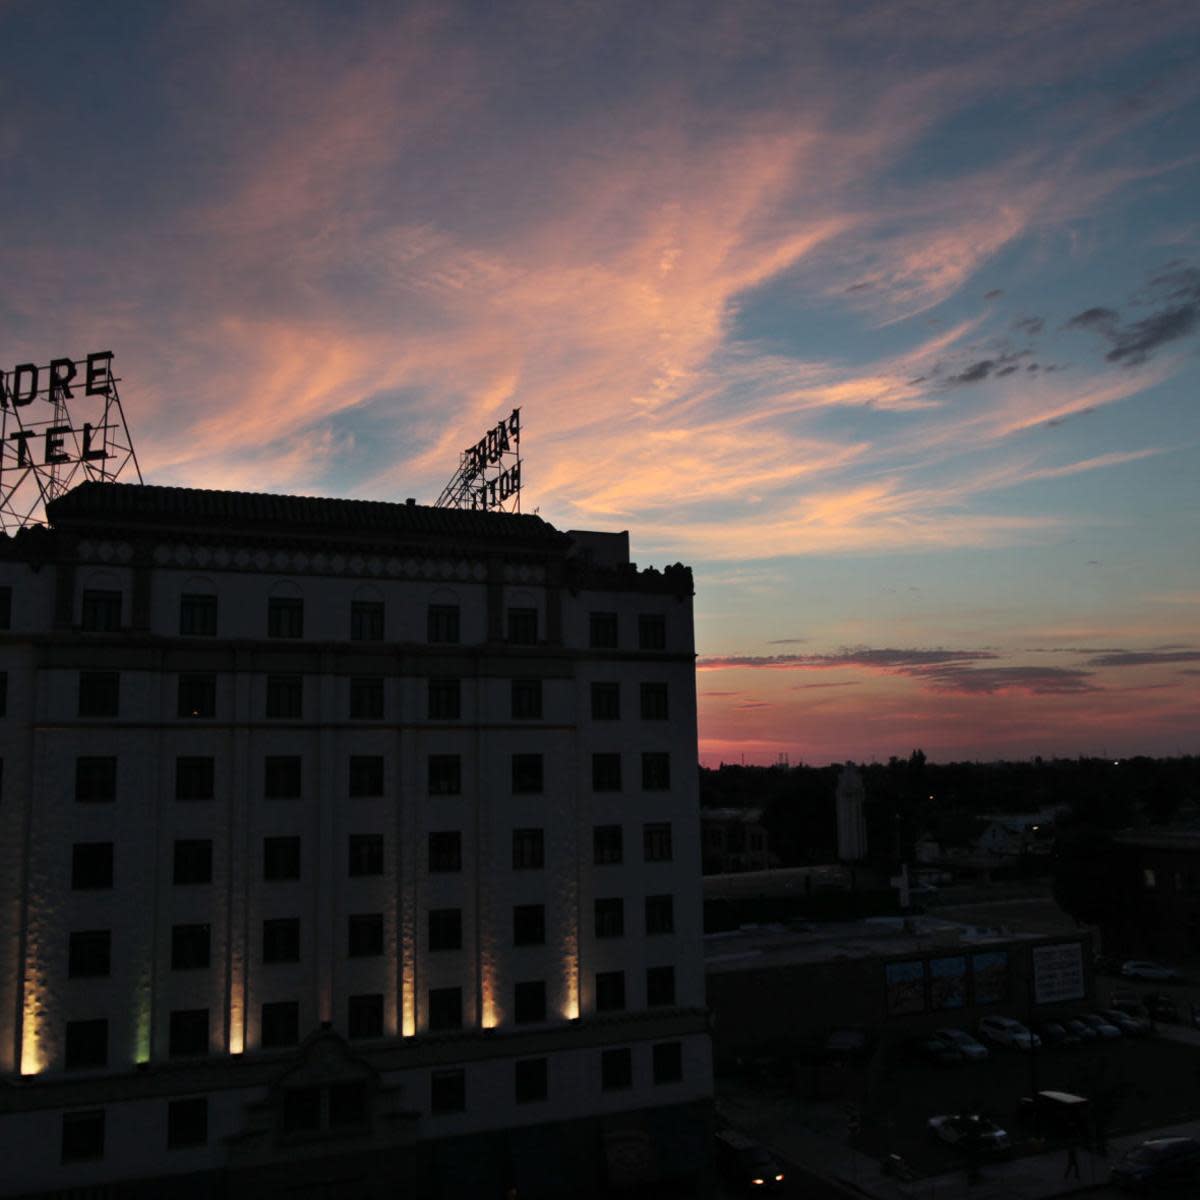 The Hotel Padre is one of the city's finest hotels.